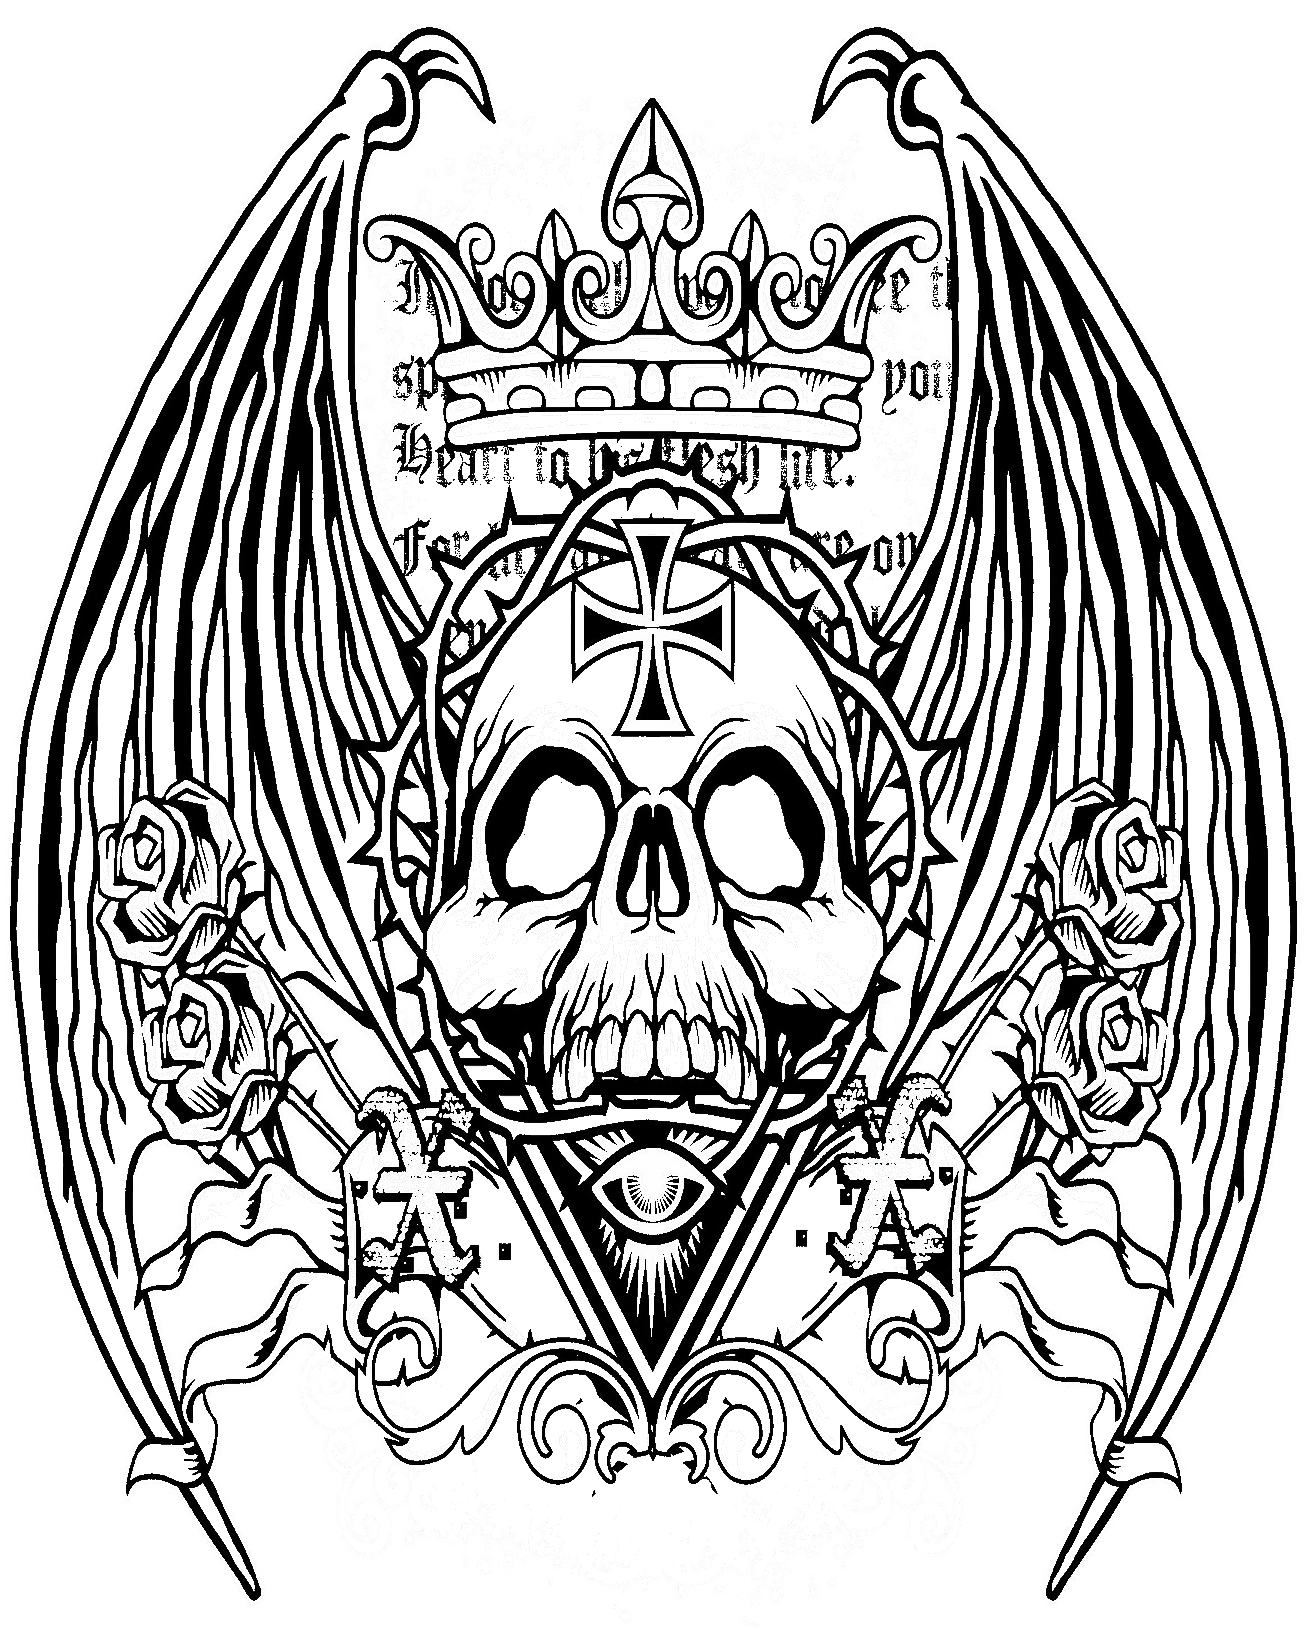 Skulls Of Hell Coloring Gothic Horror For Adults Home Of Rachel Mintz Coloring Books